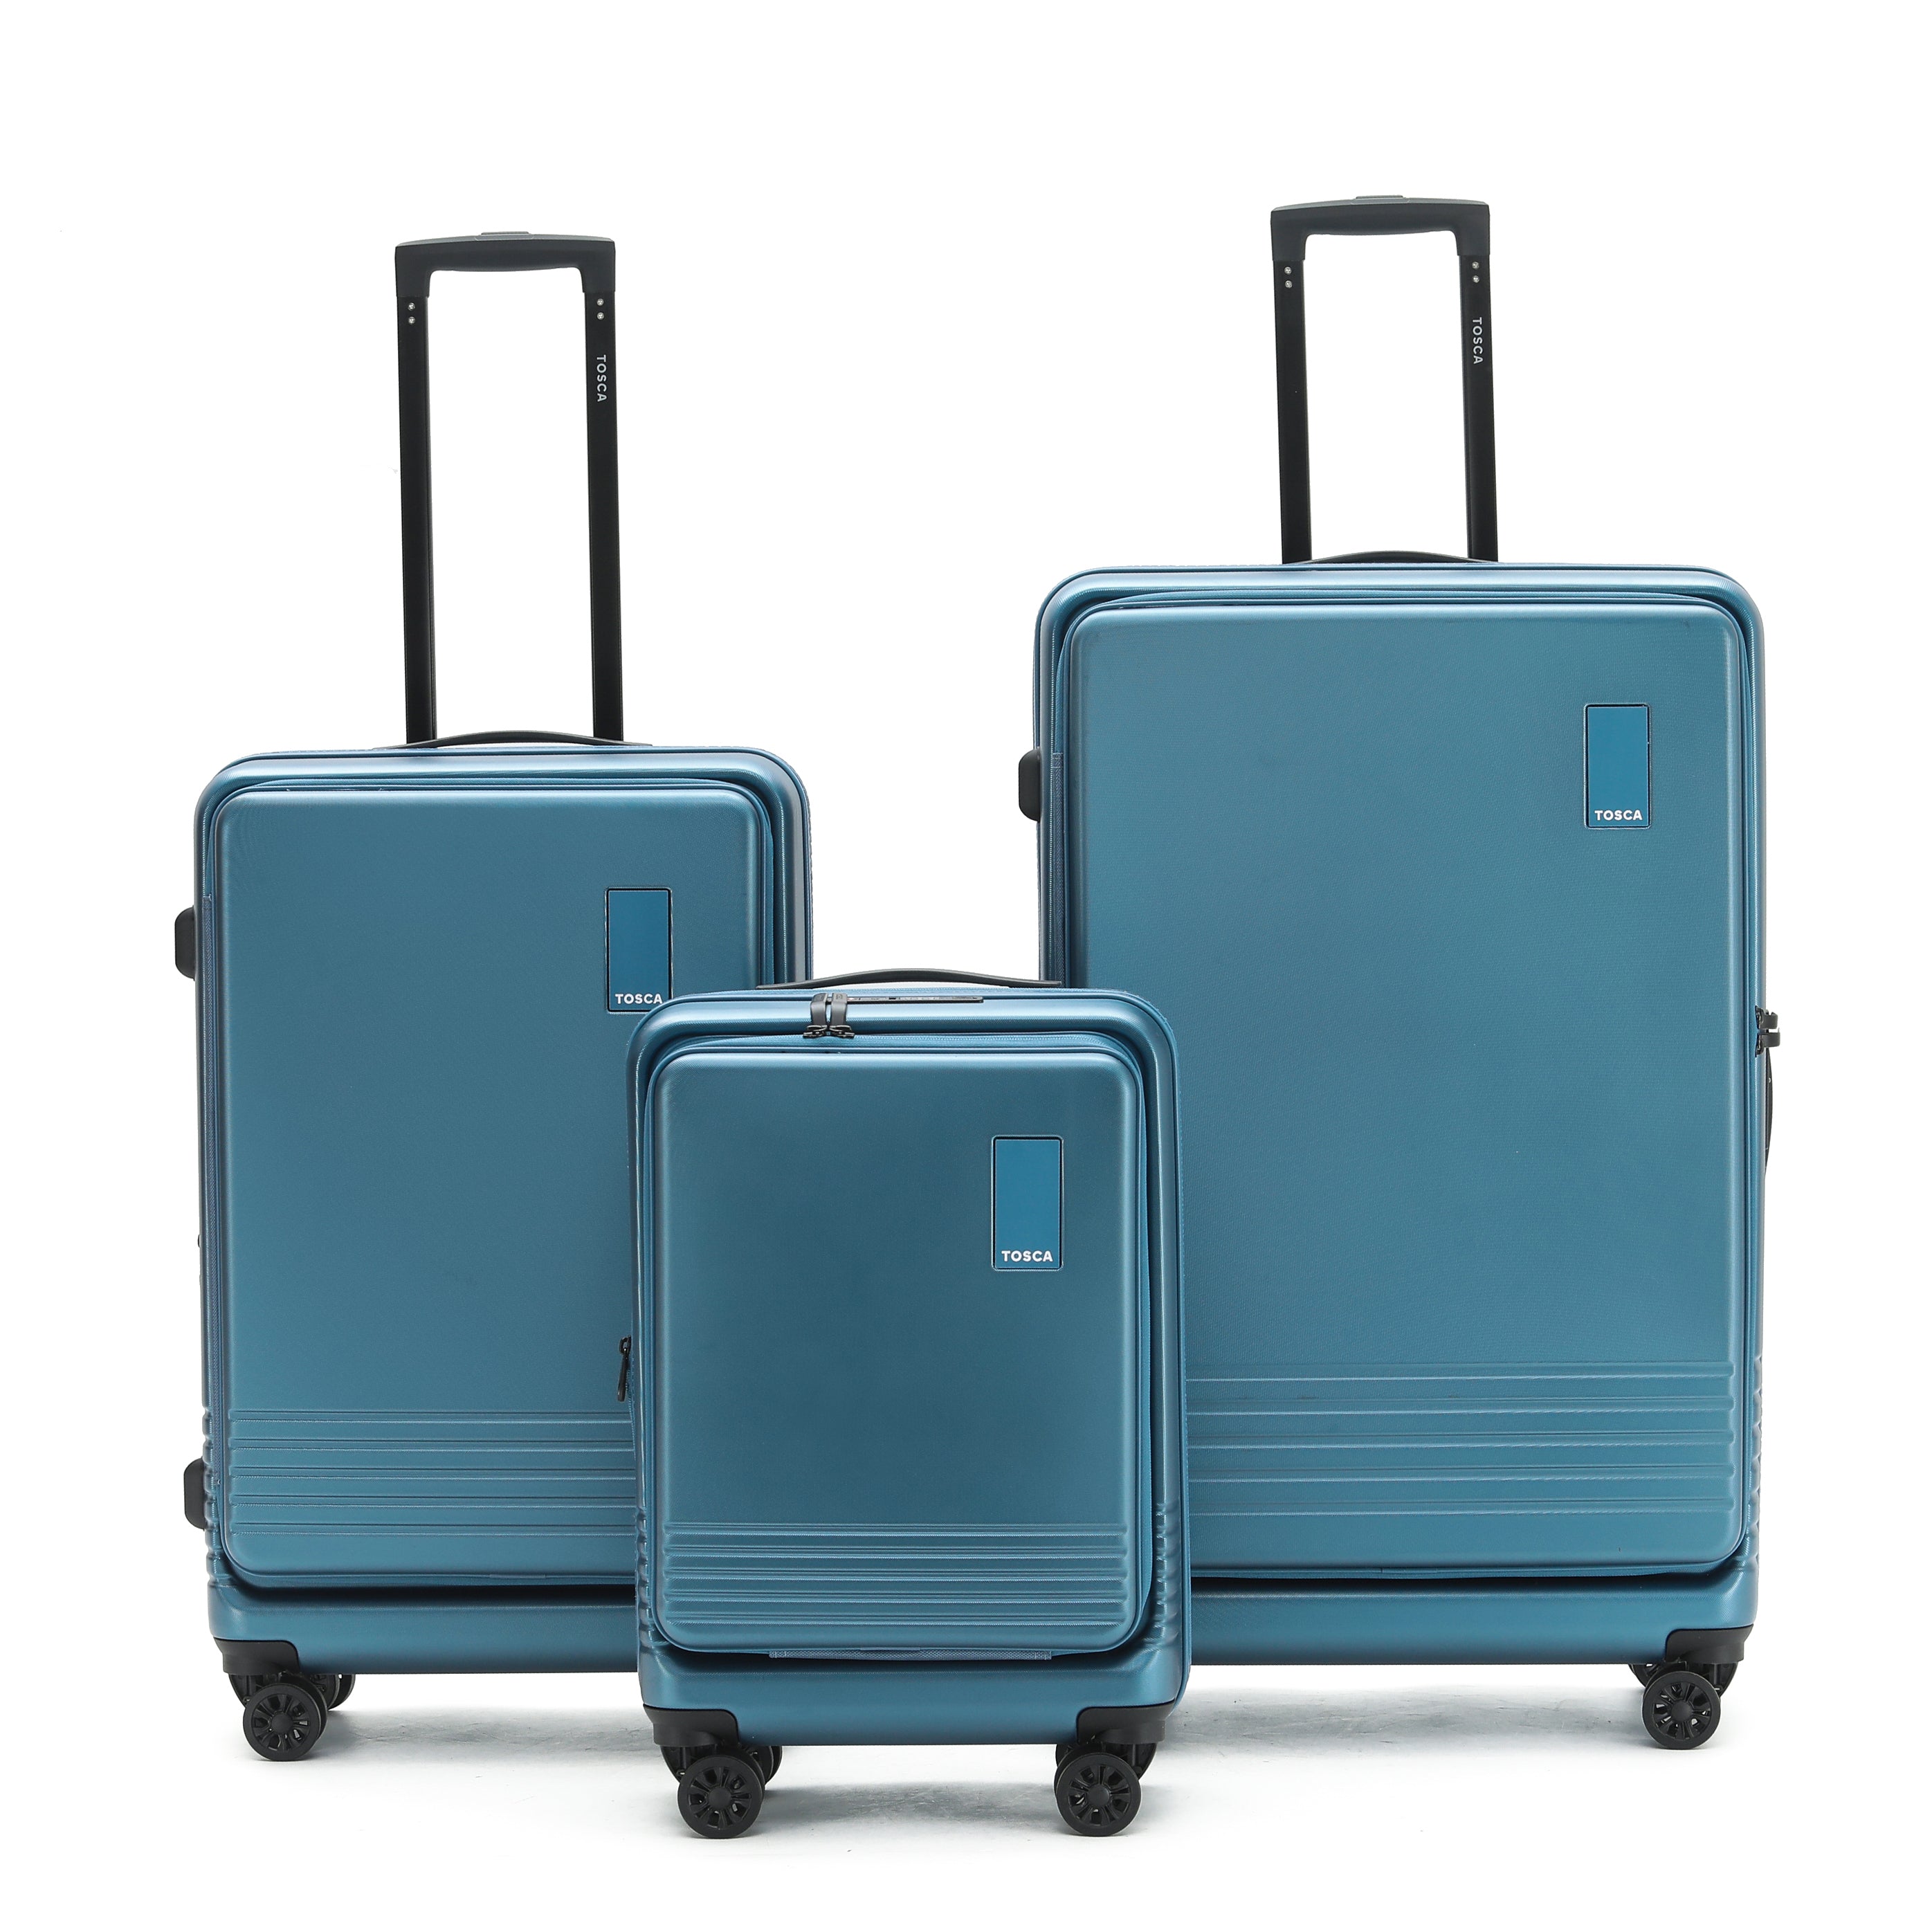 Tosca - TCA644 Horizon Front lid opening Set of 3 suitcases - Blue